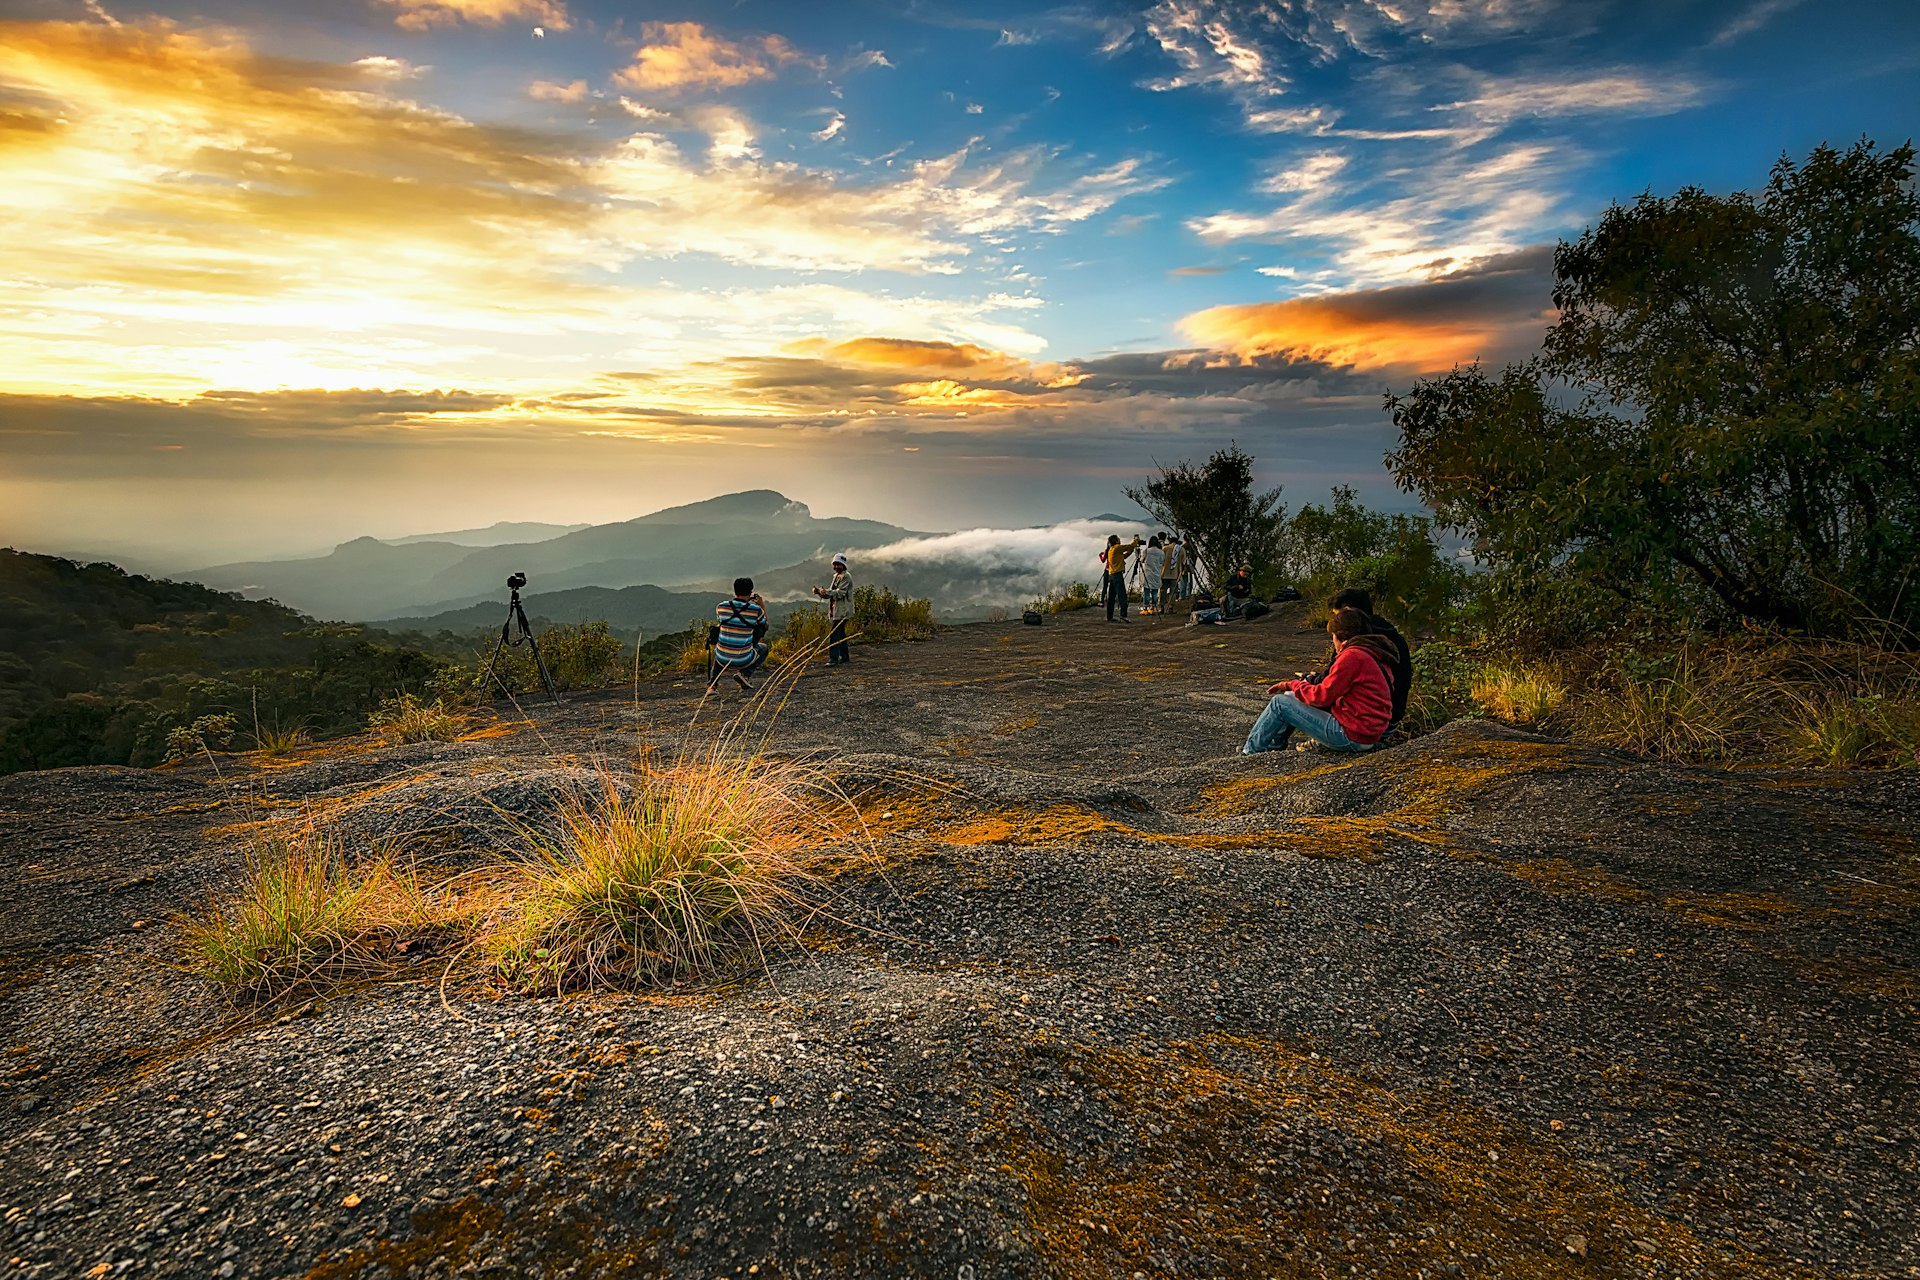 Groups of people watch the sunrise from a mountain viewpoint